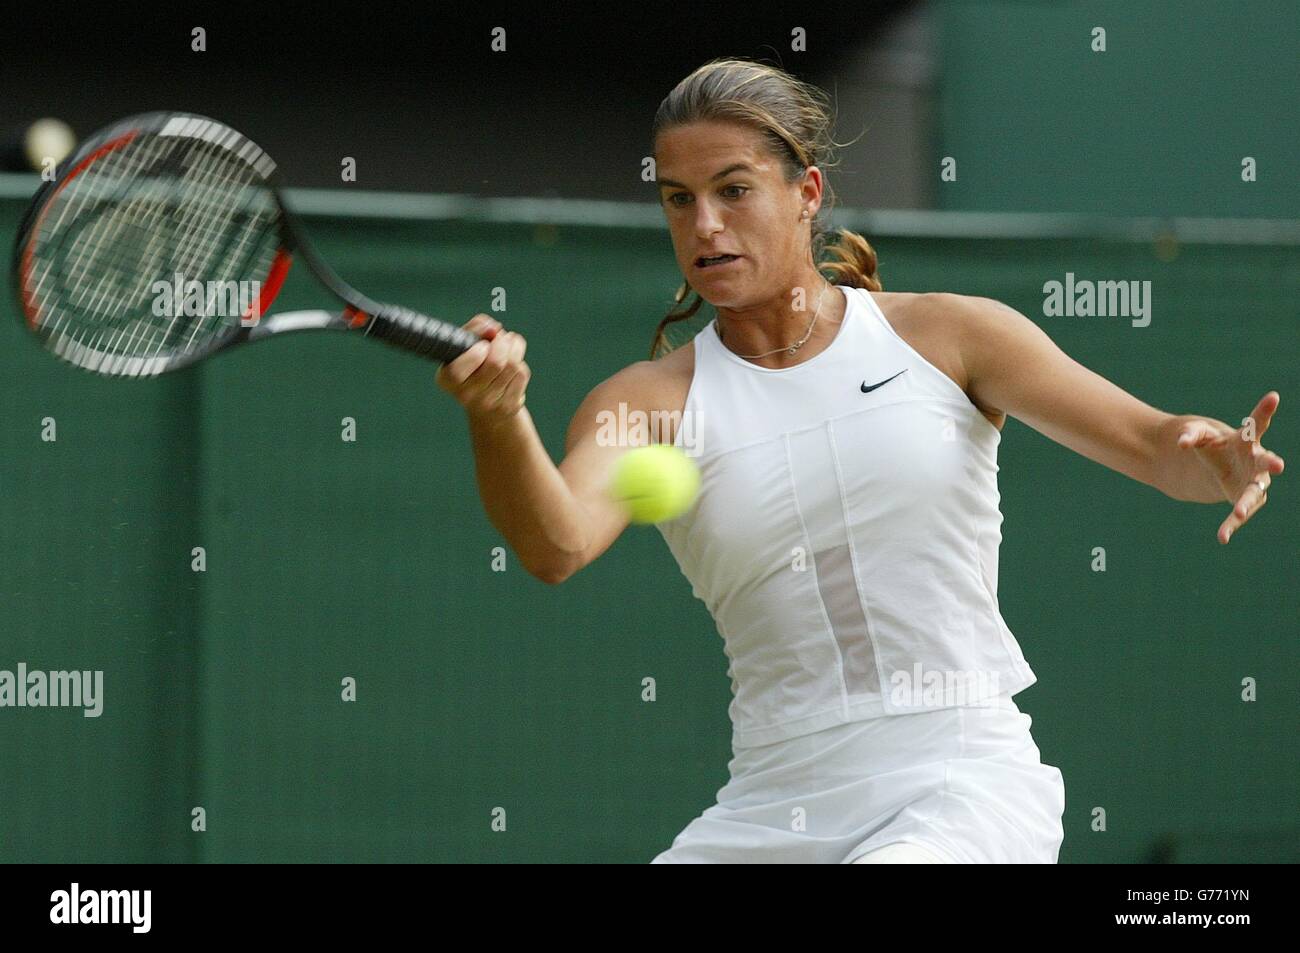 EDITORIAL USE ONLY, NO COMMERCIAL USE. Amelie Mauresmo of France, the 9th seed in action against Jennifer Capriati, the 3rd seed from the USA on Centre Court at Wimbledon. Stock Photo